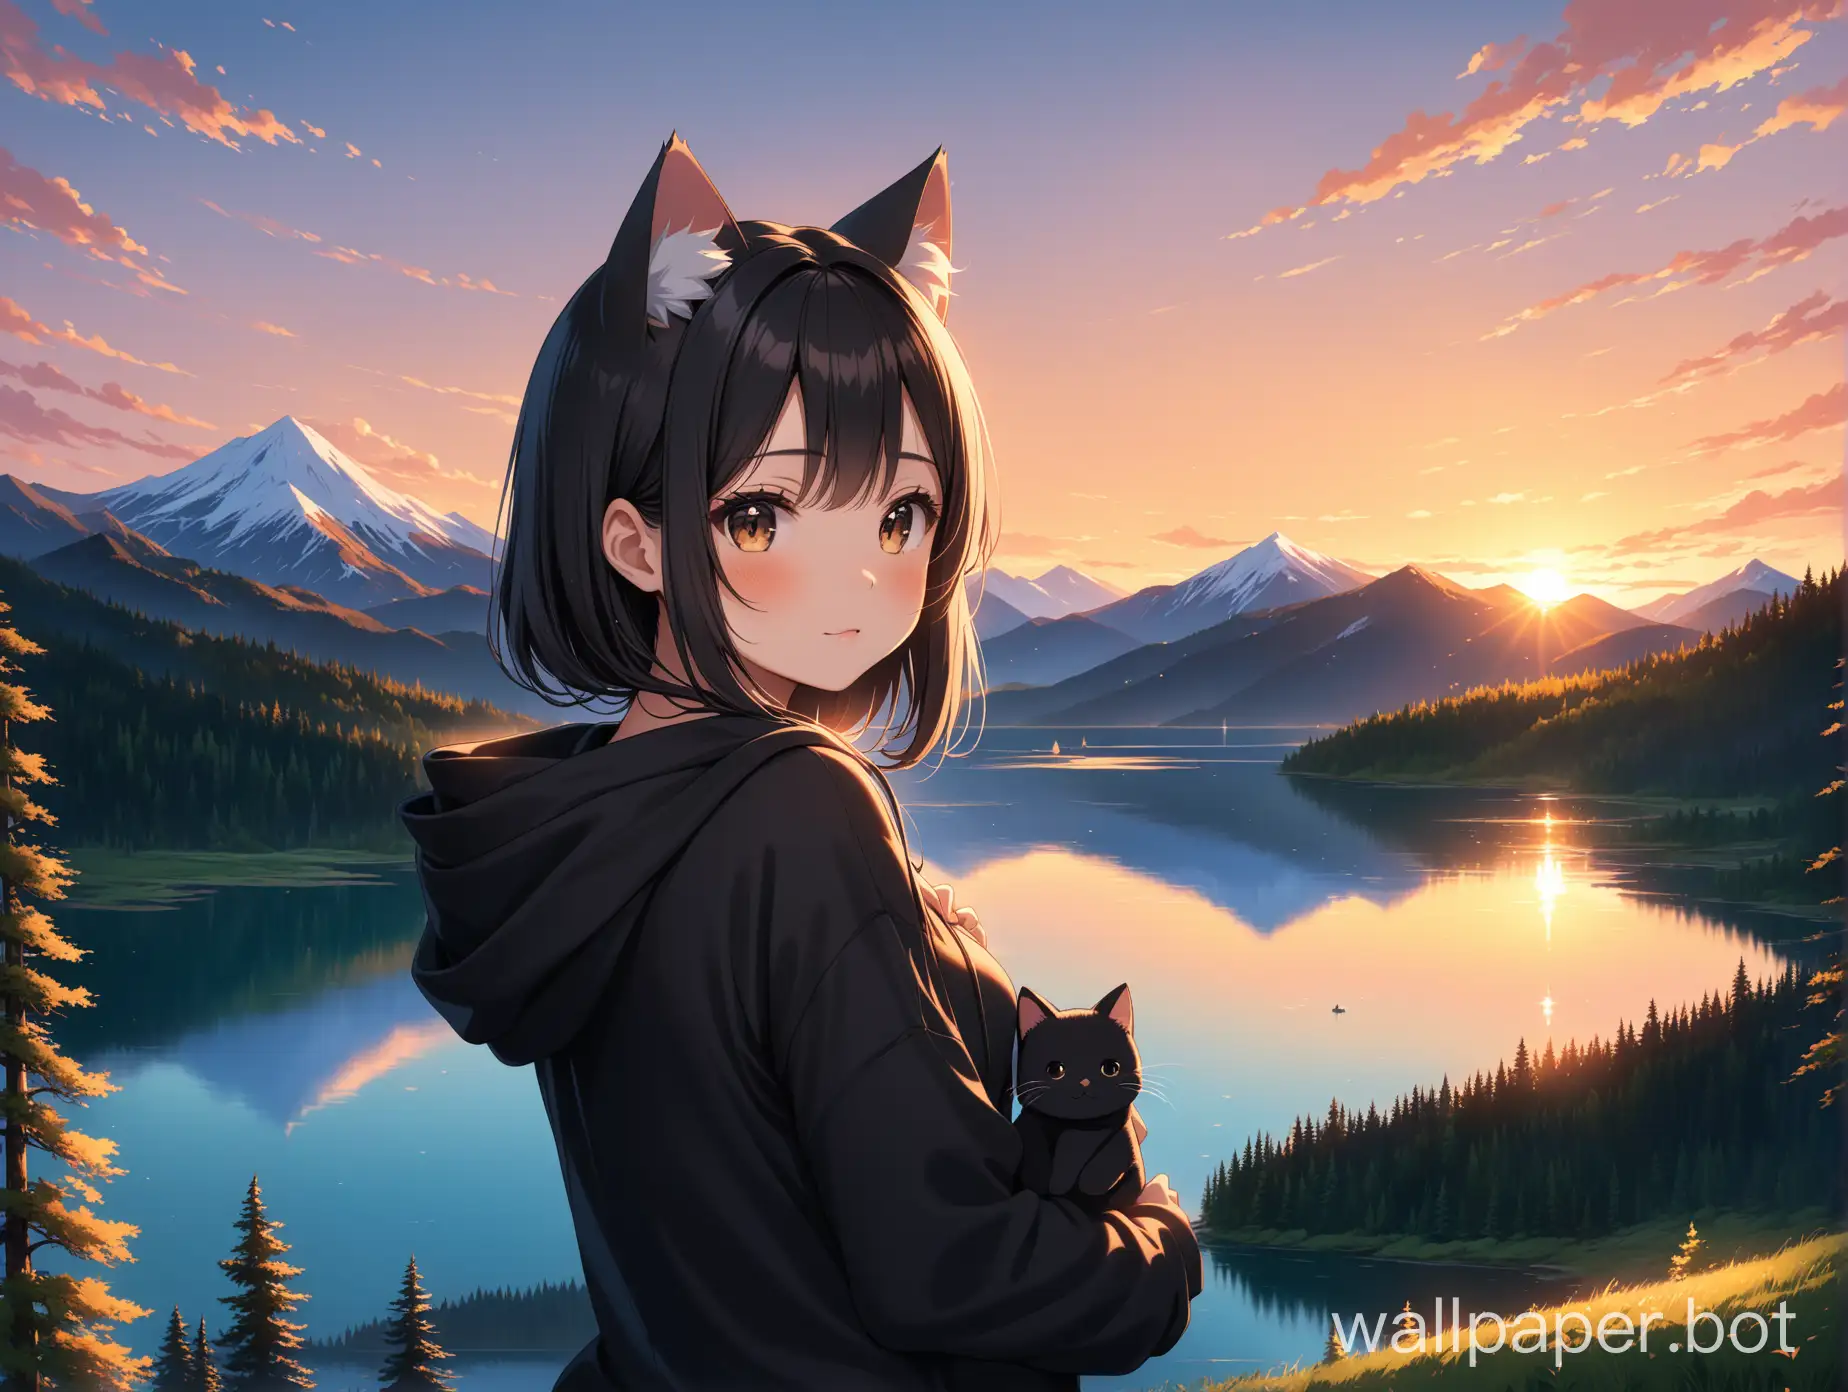 high-res, masterpiece, 4k, 8k, sunset, forest, lake, mountains, girl in cute black hoodie with cat ears